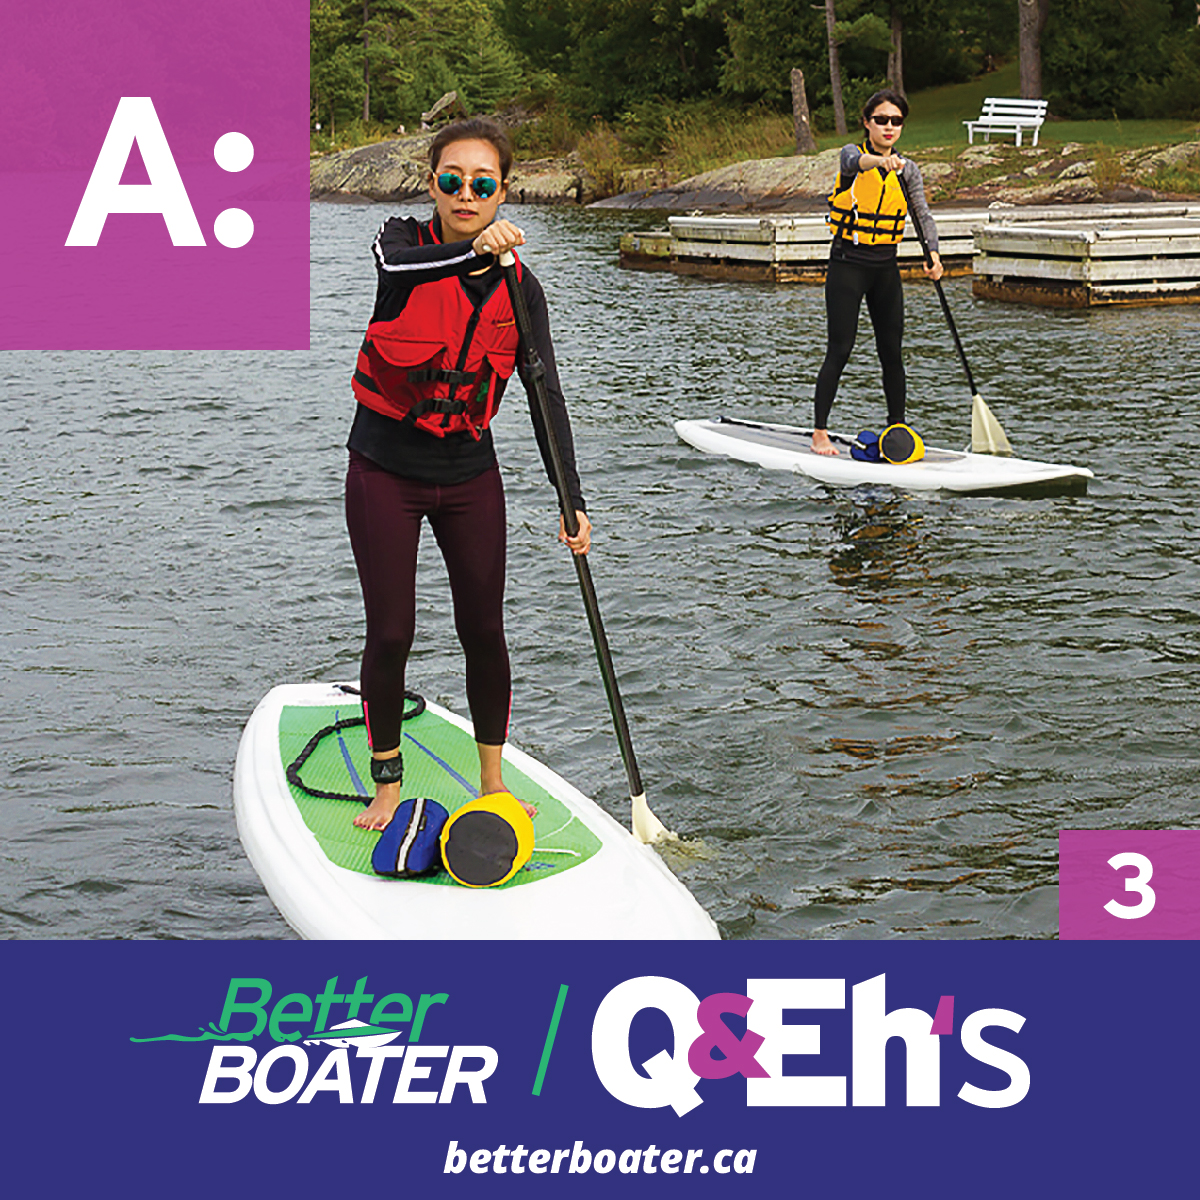 https://betterboater.ca/SUP%20Impared